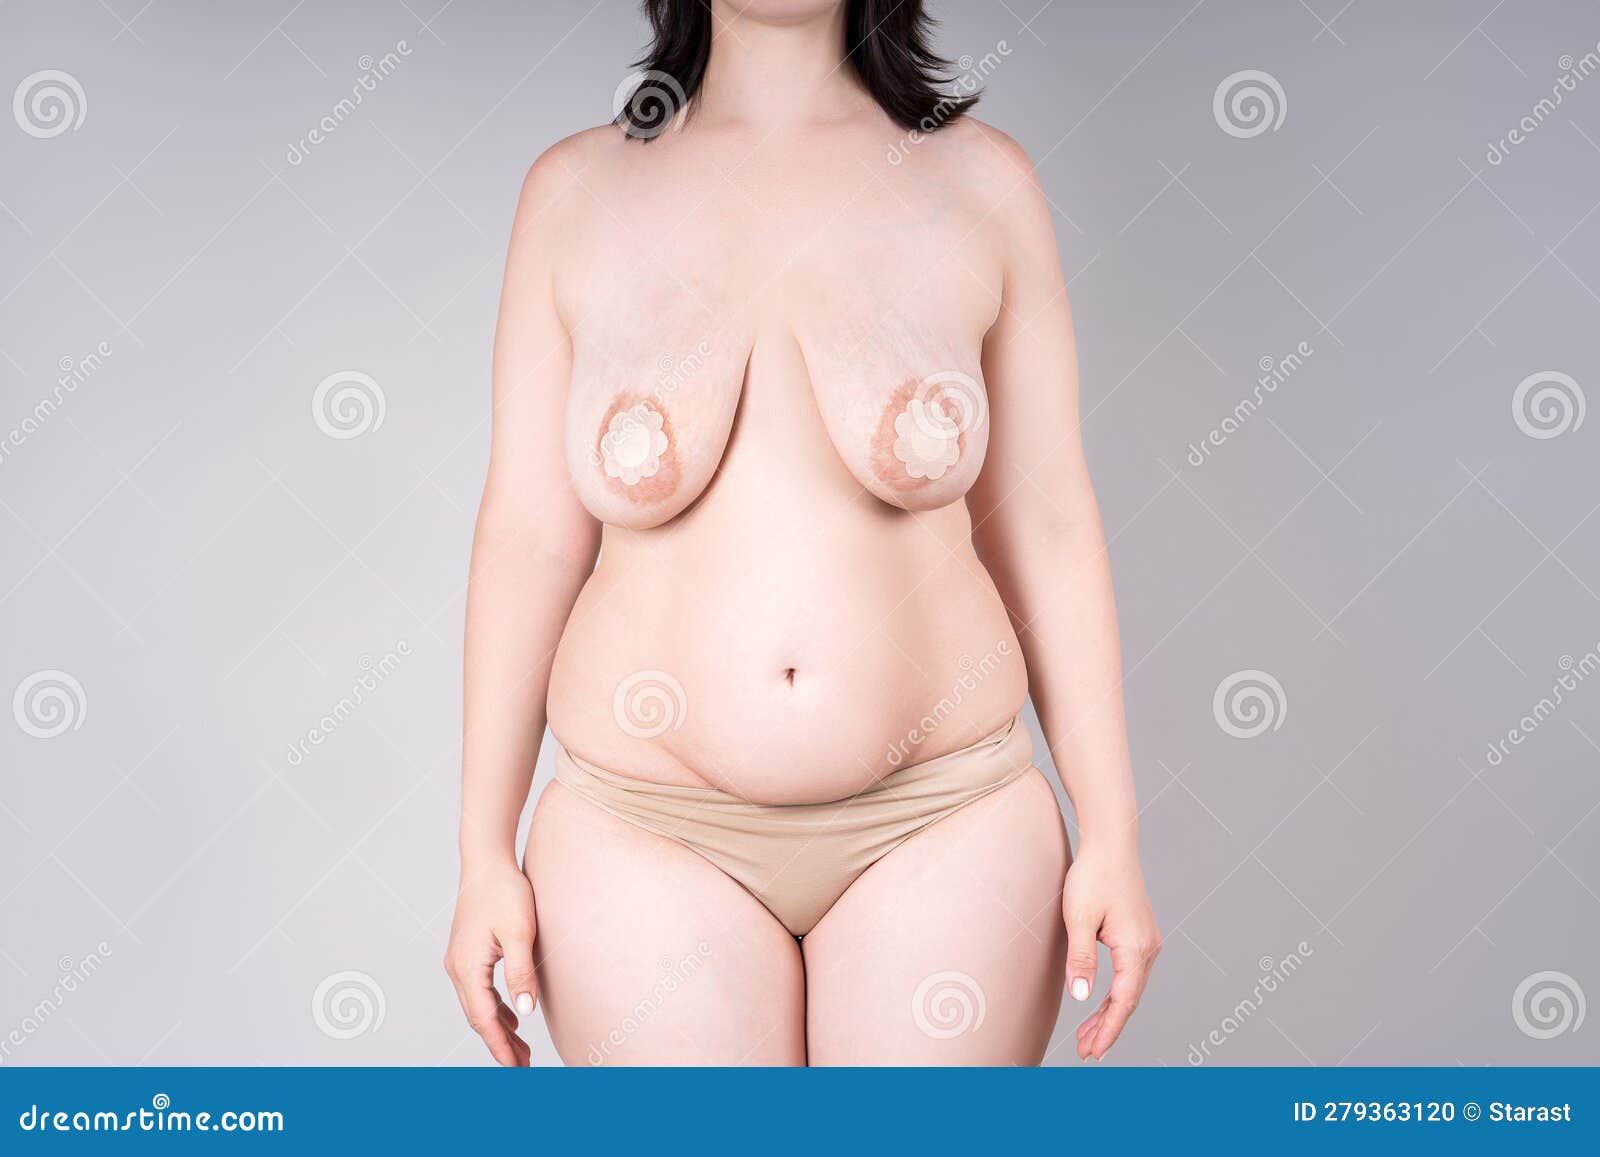 Fat Woman with Saggy Breasts, Obese Female Body, Plastic Surgery and  Aesthetic Medicine Concept on Grey Background Stock Photo - Image of curvy,  mammoplasty: 279363120